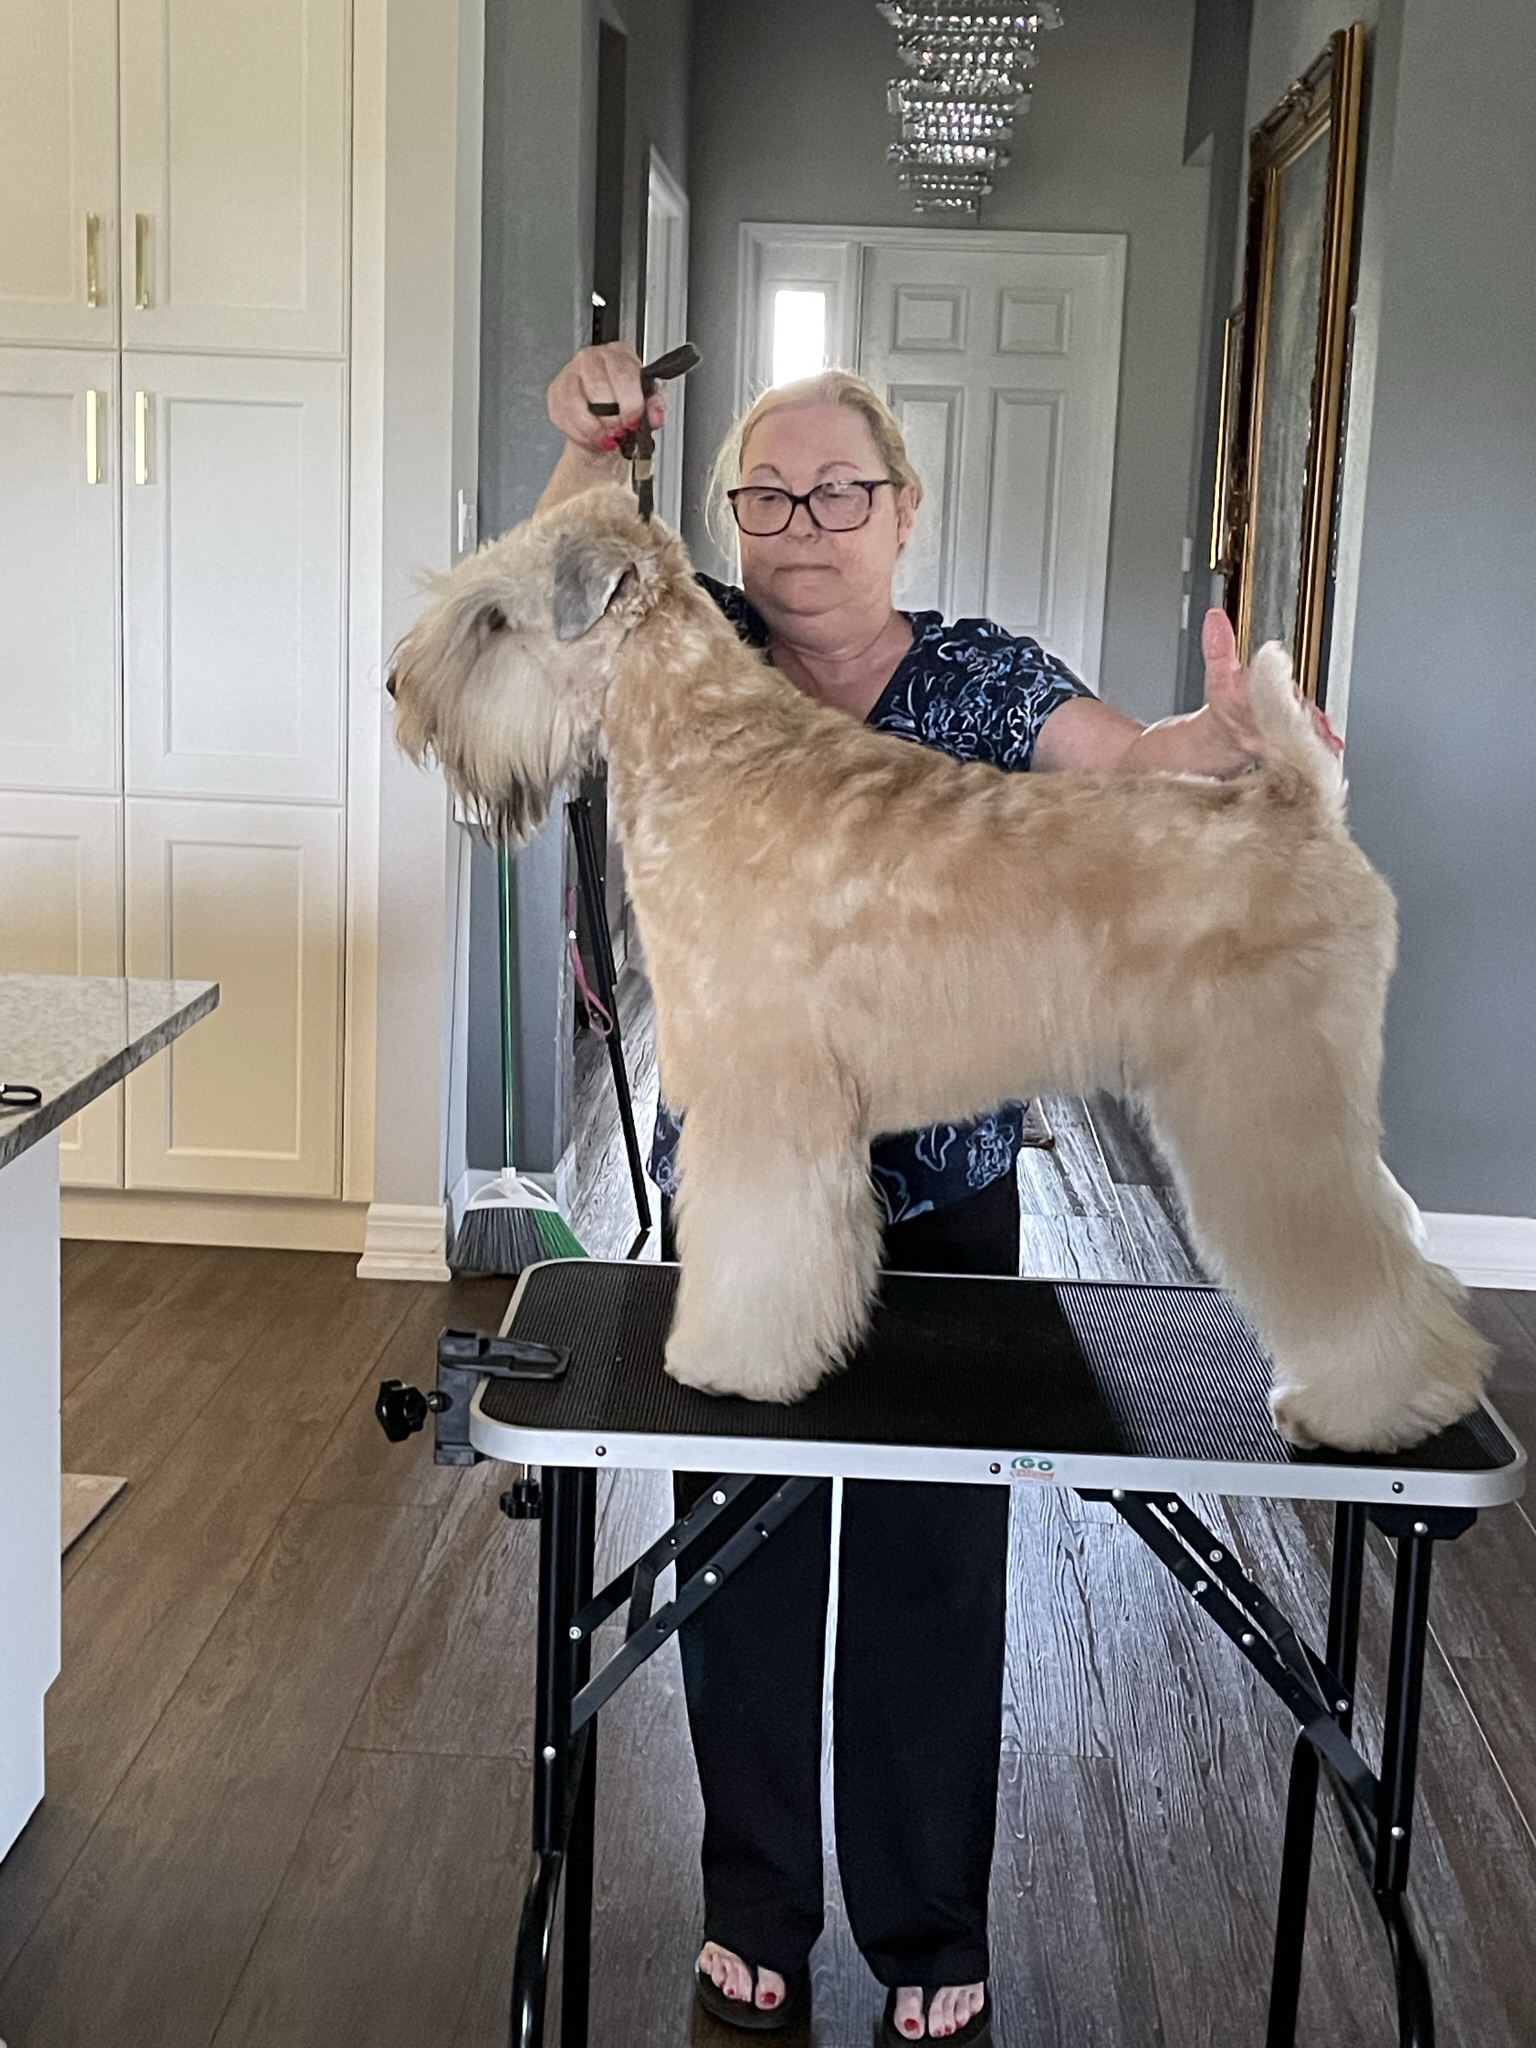 Franklin at home getting groomed